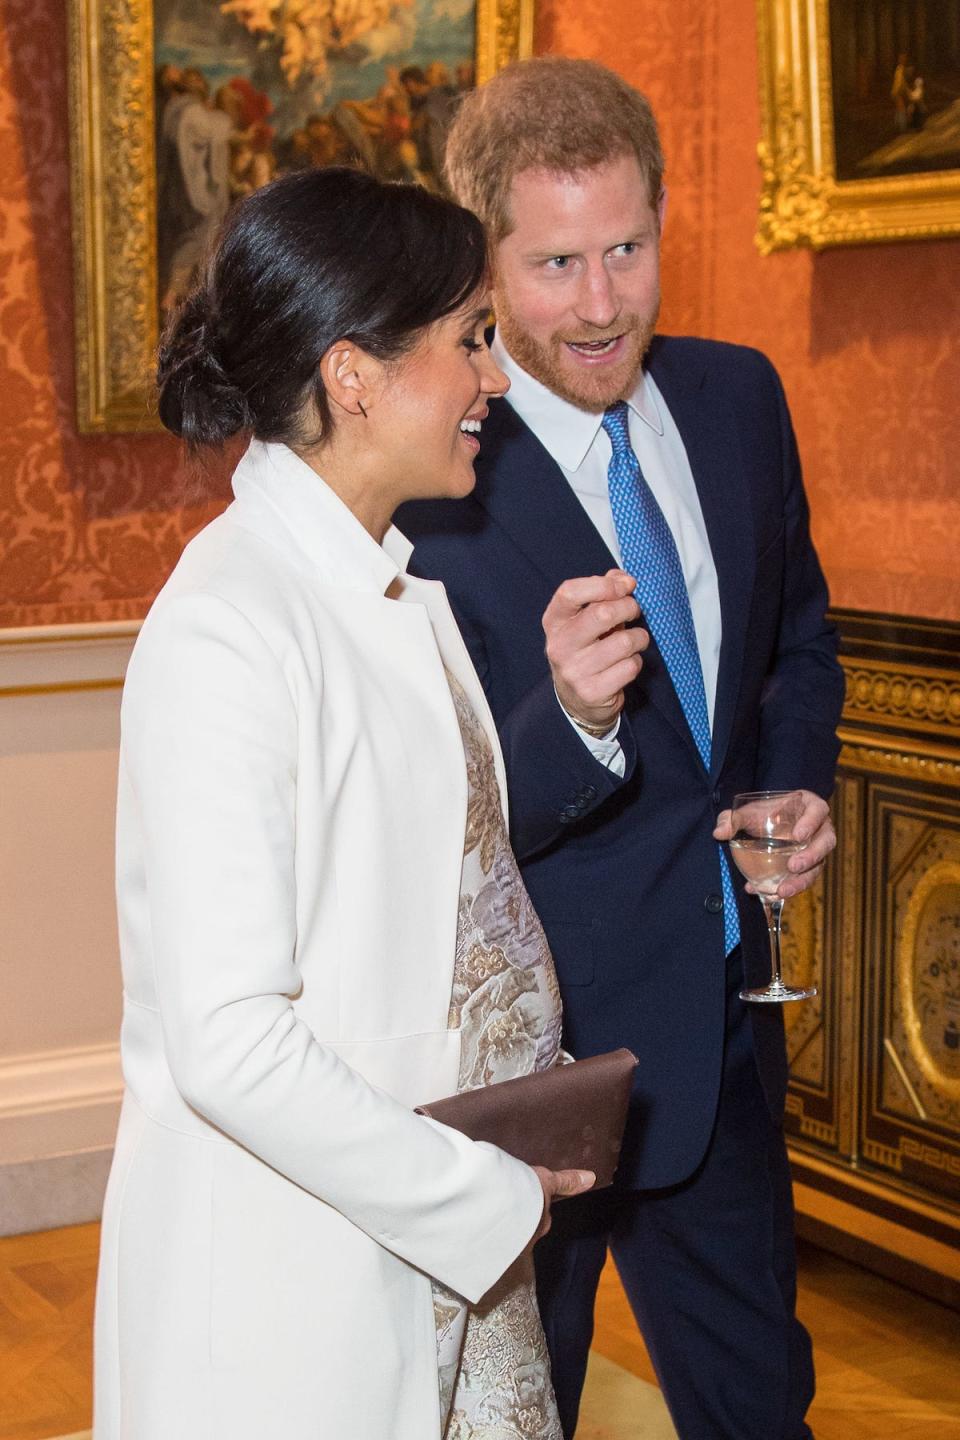 Harry and Meghan laugh